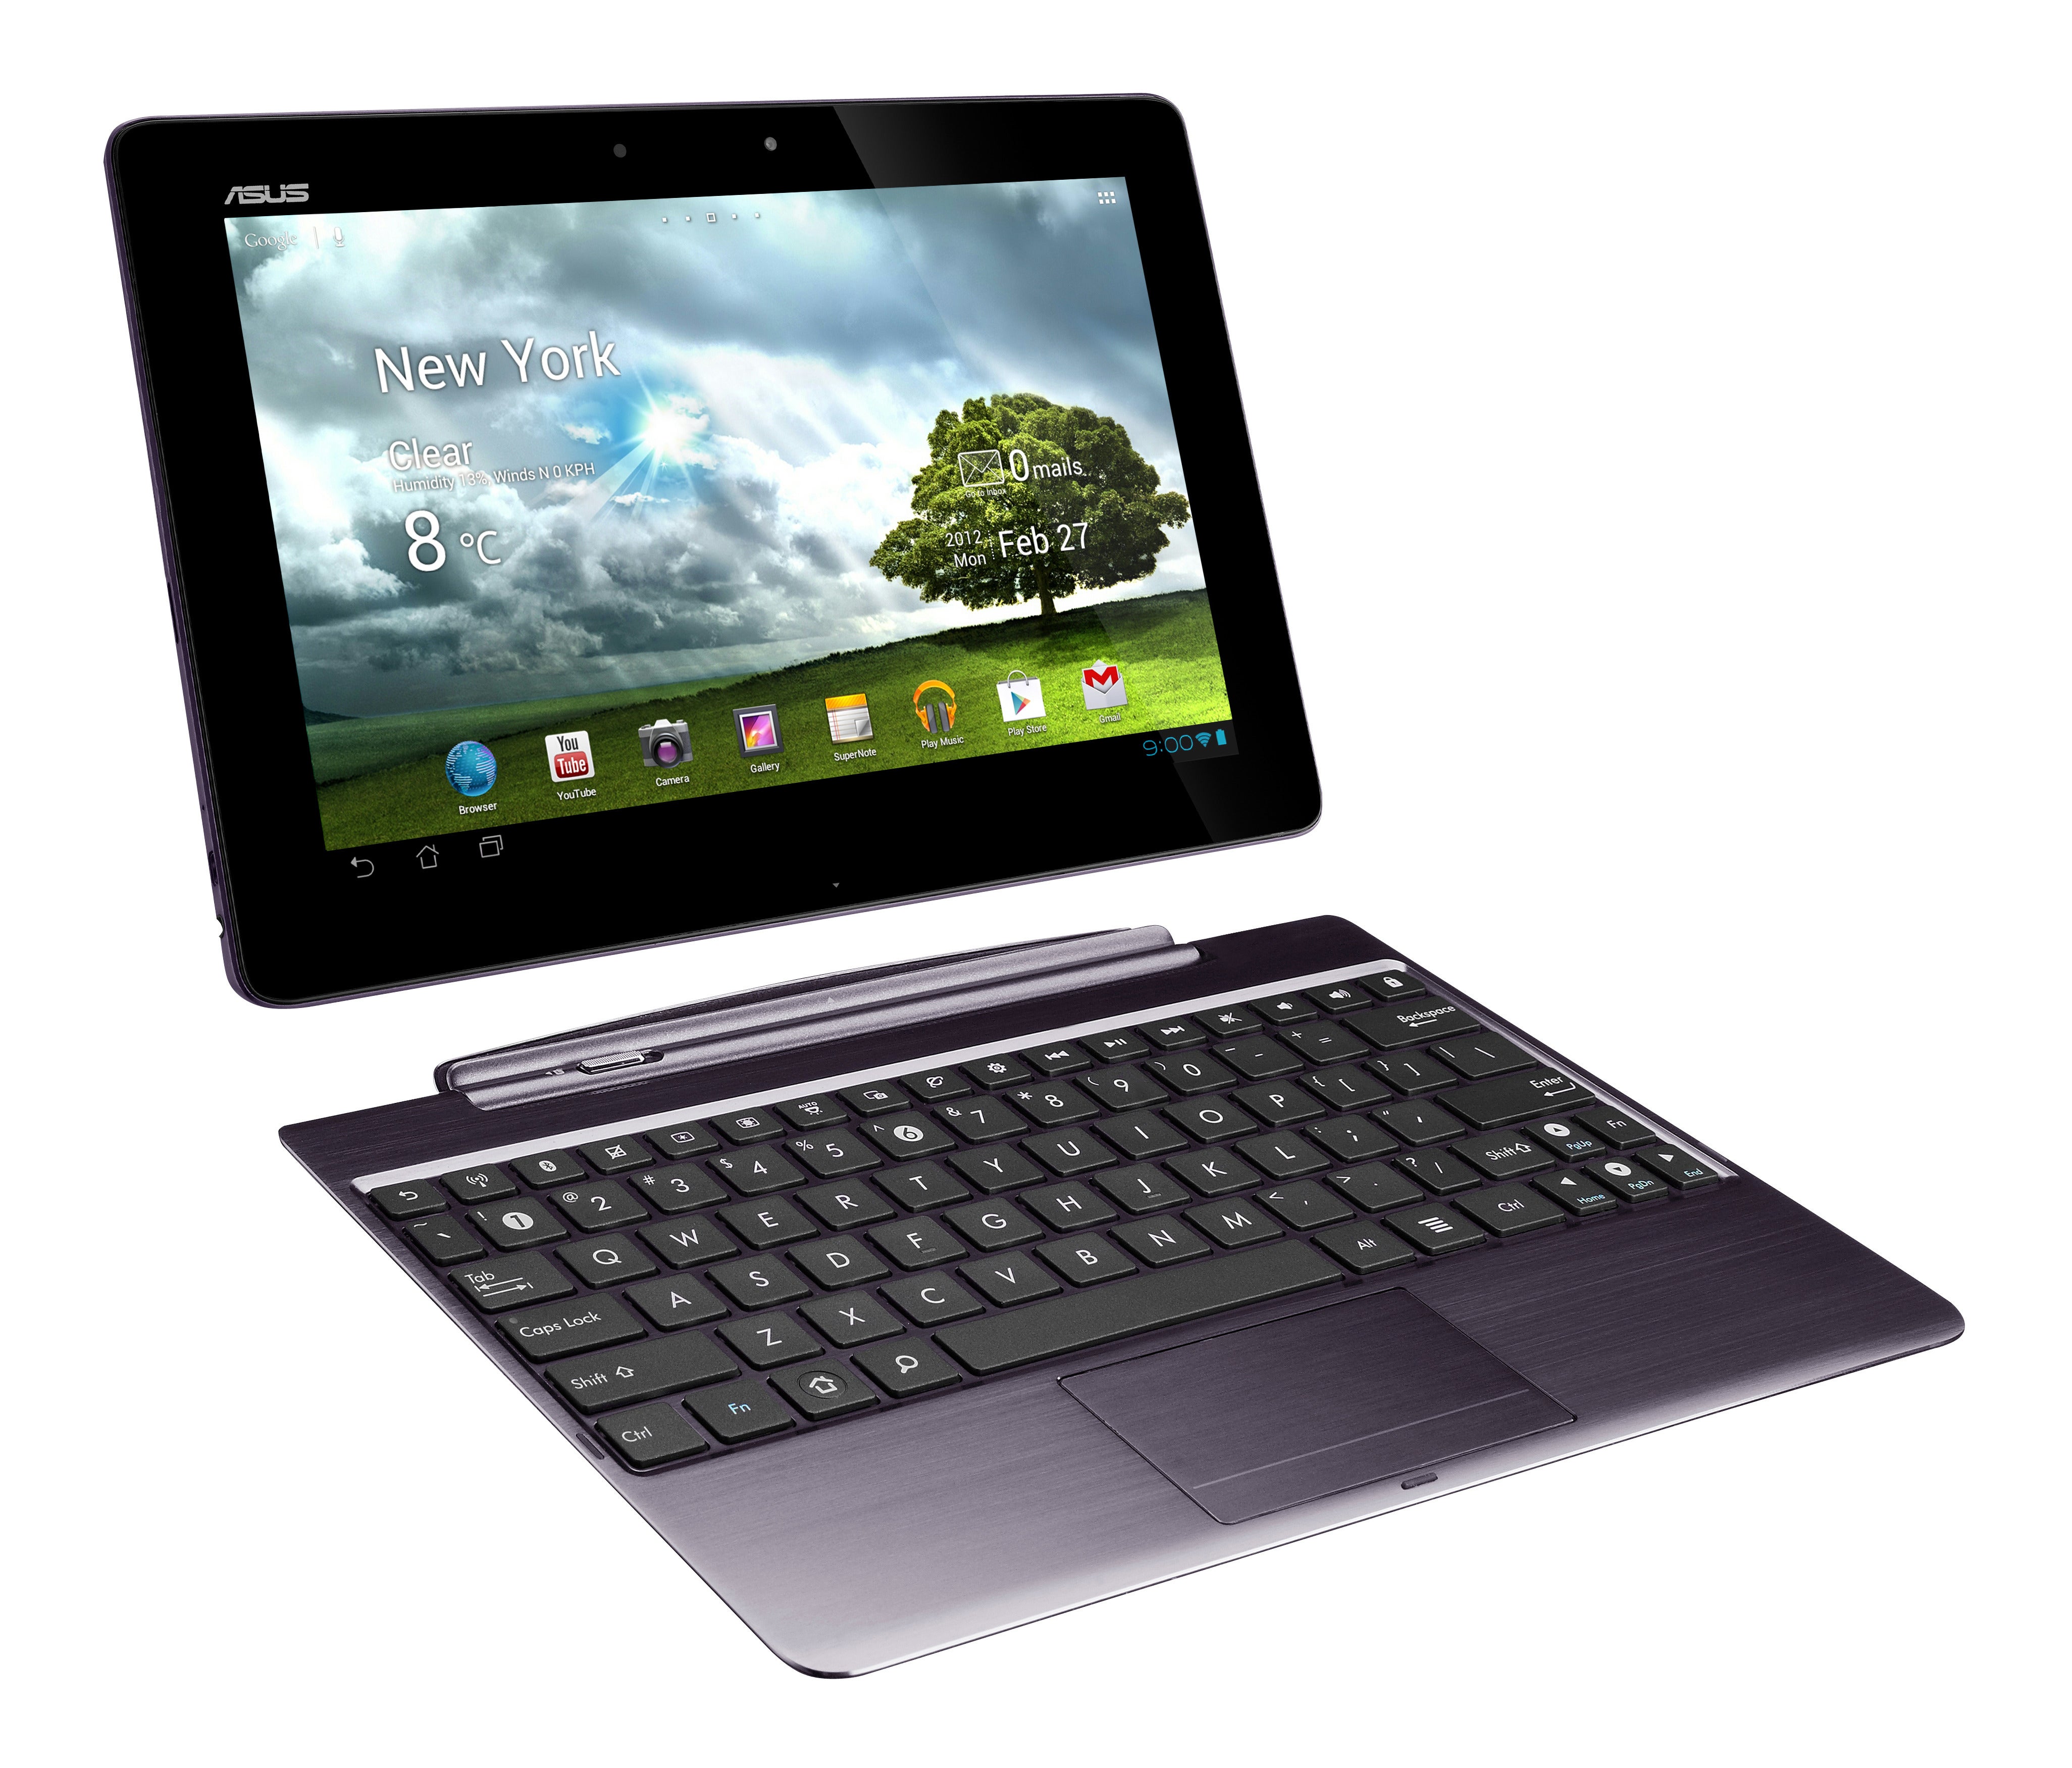 install windows 7 on asus eee pad transformer review